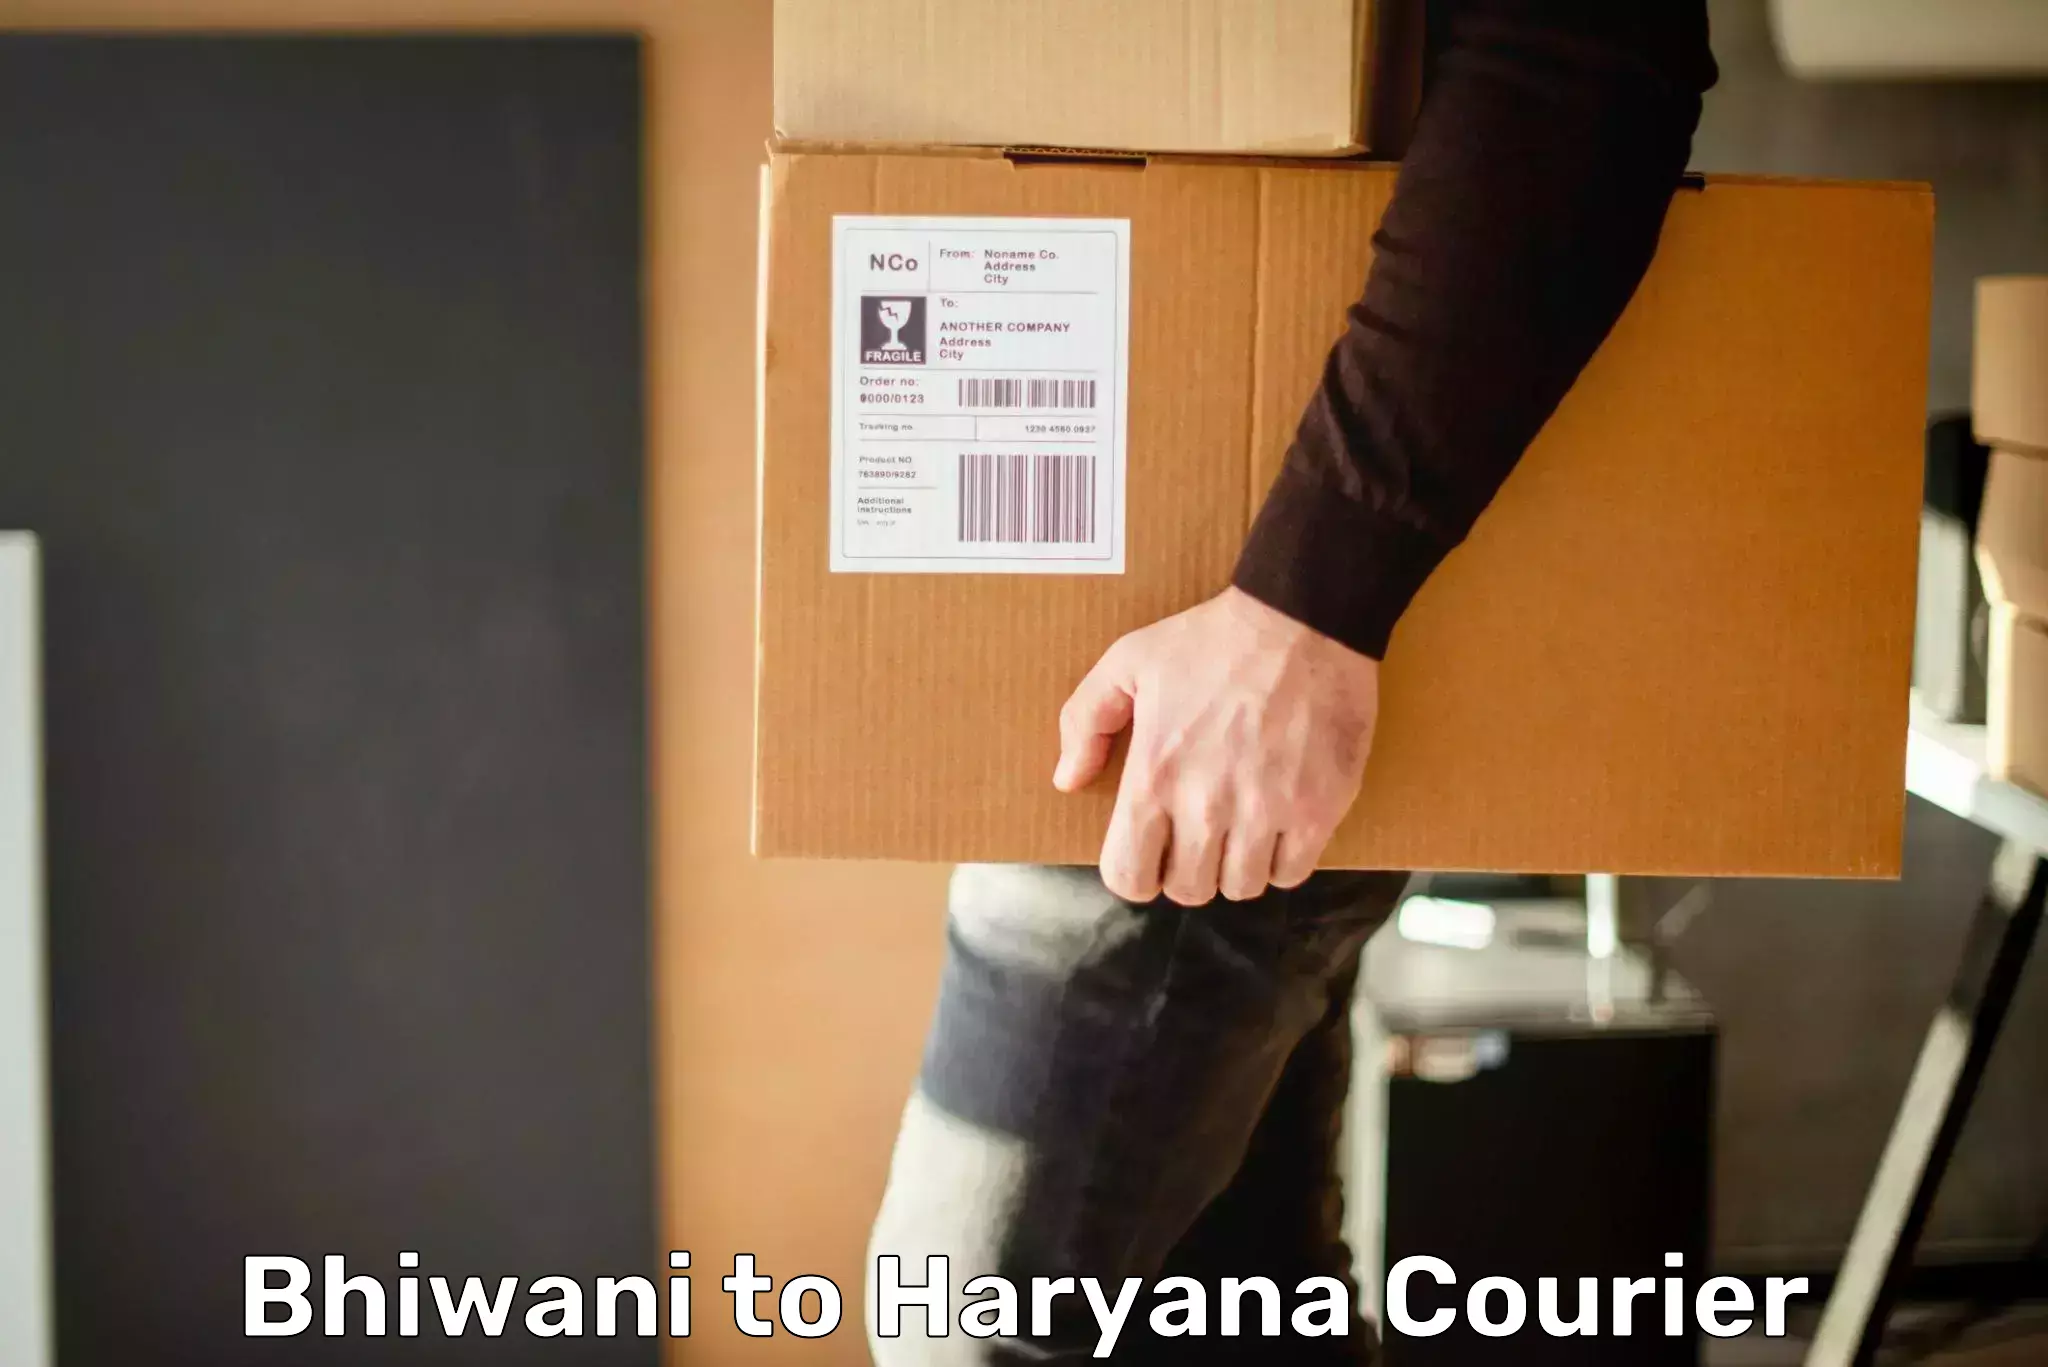 Package delivery network Bhiwani to Hodal